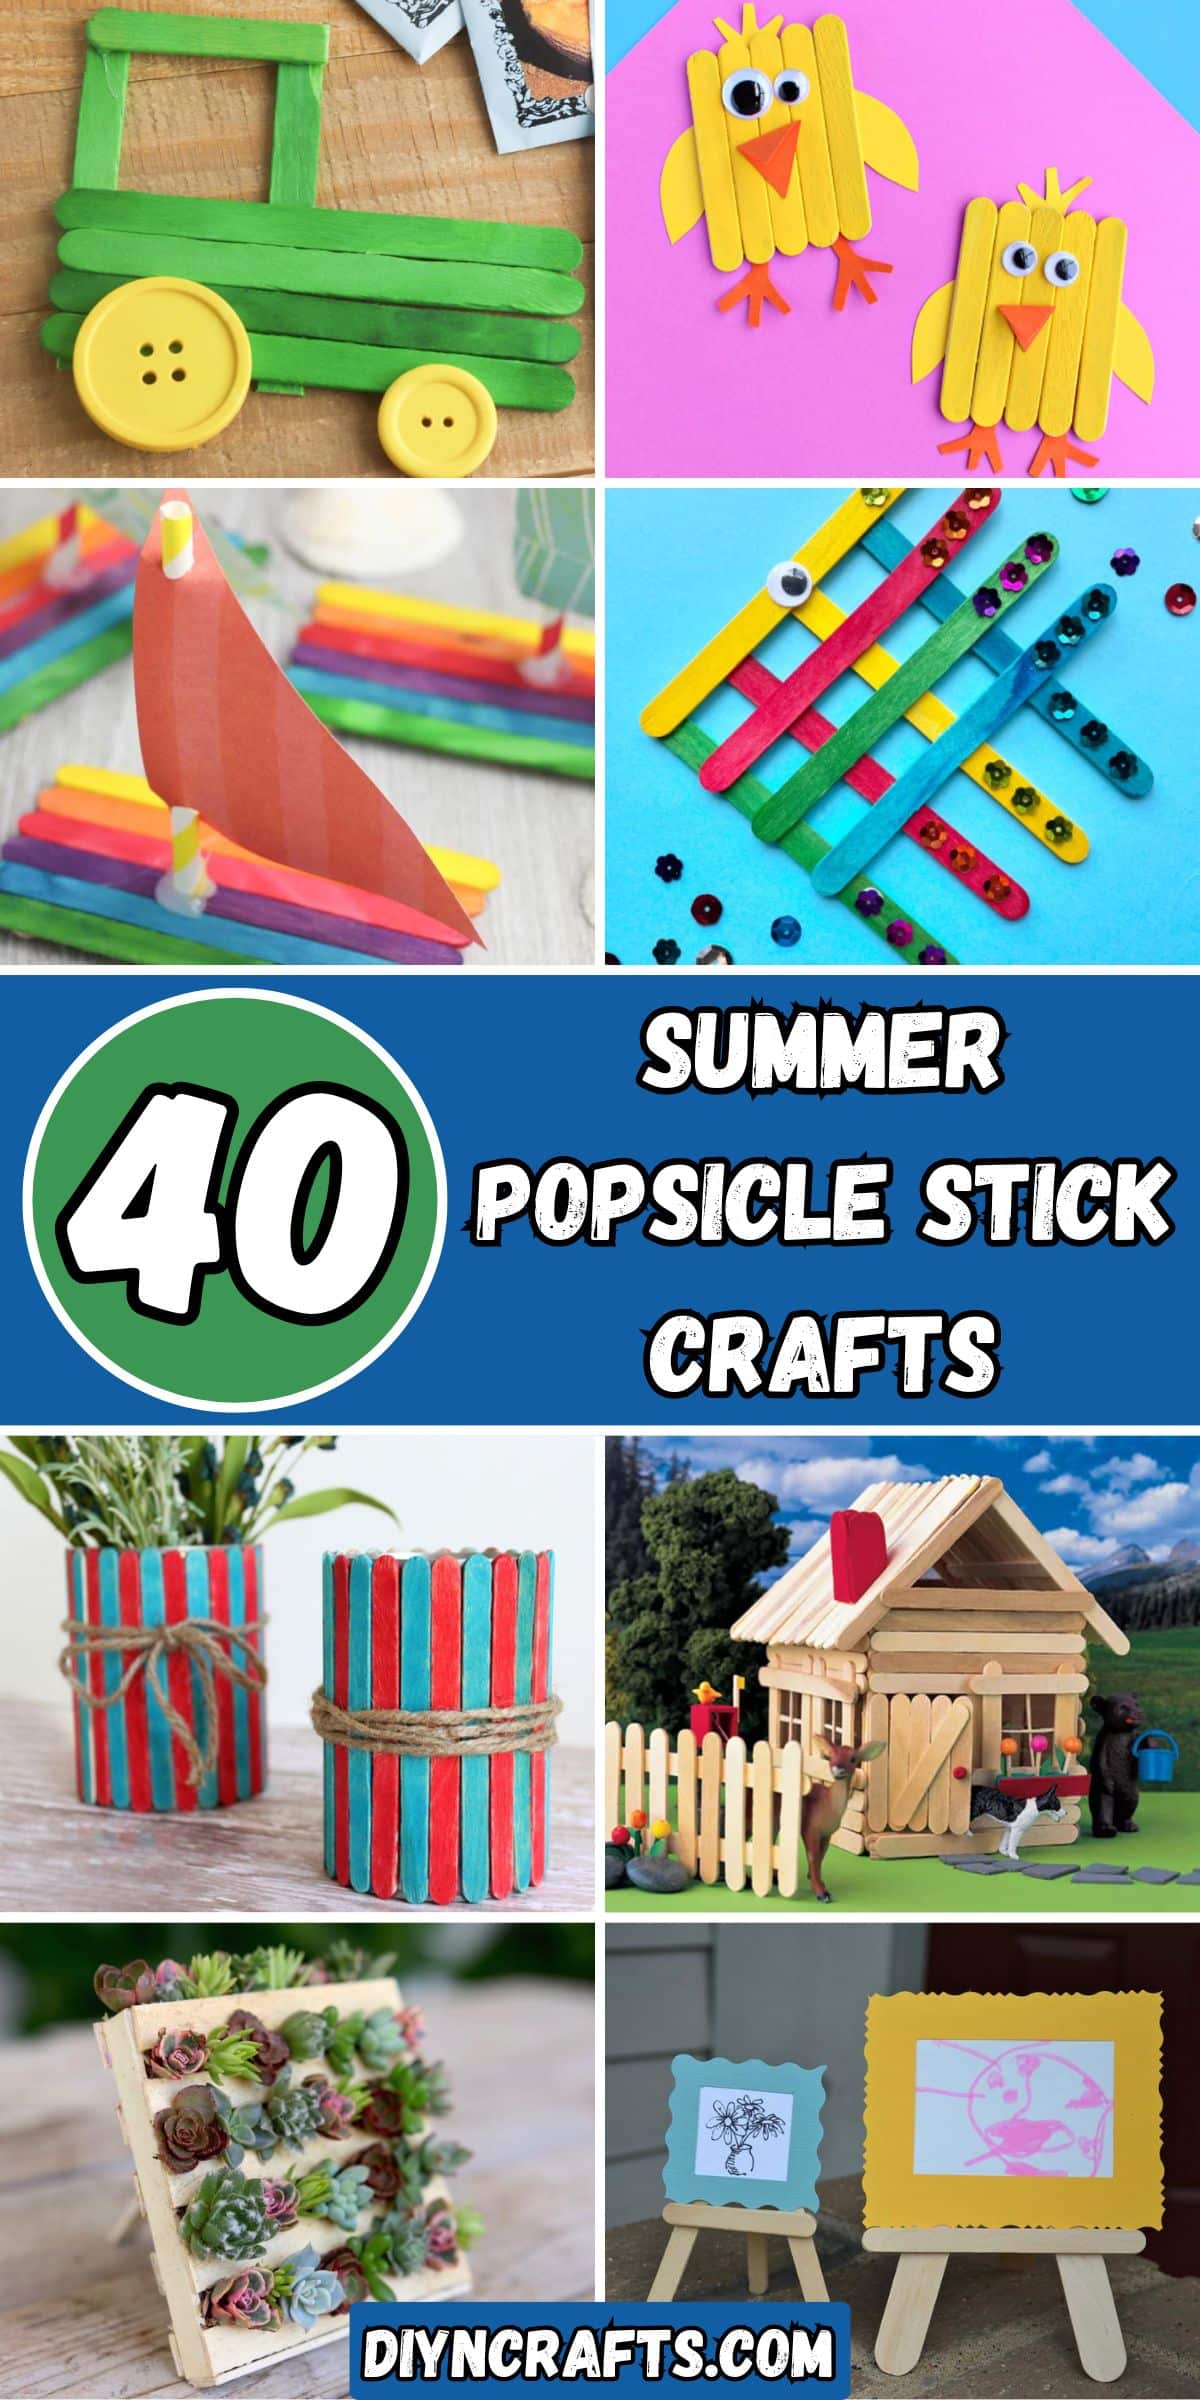 40 Summer Popsicle Stick Crafts collage.